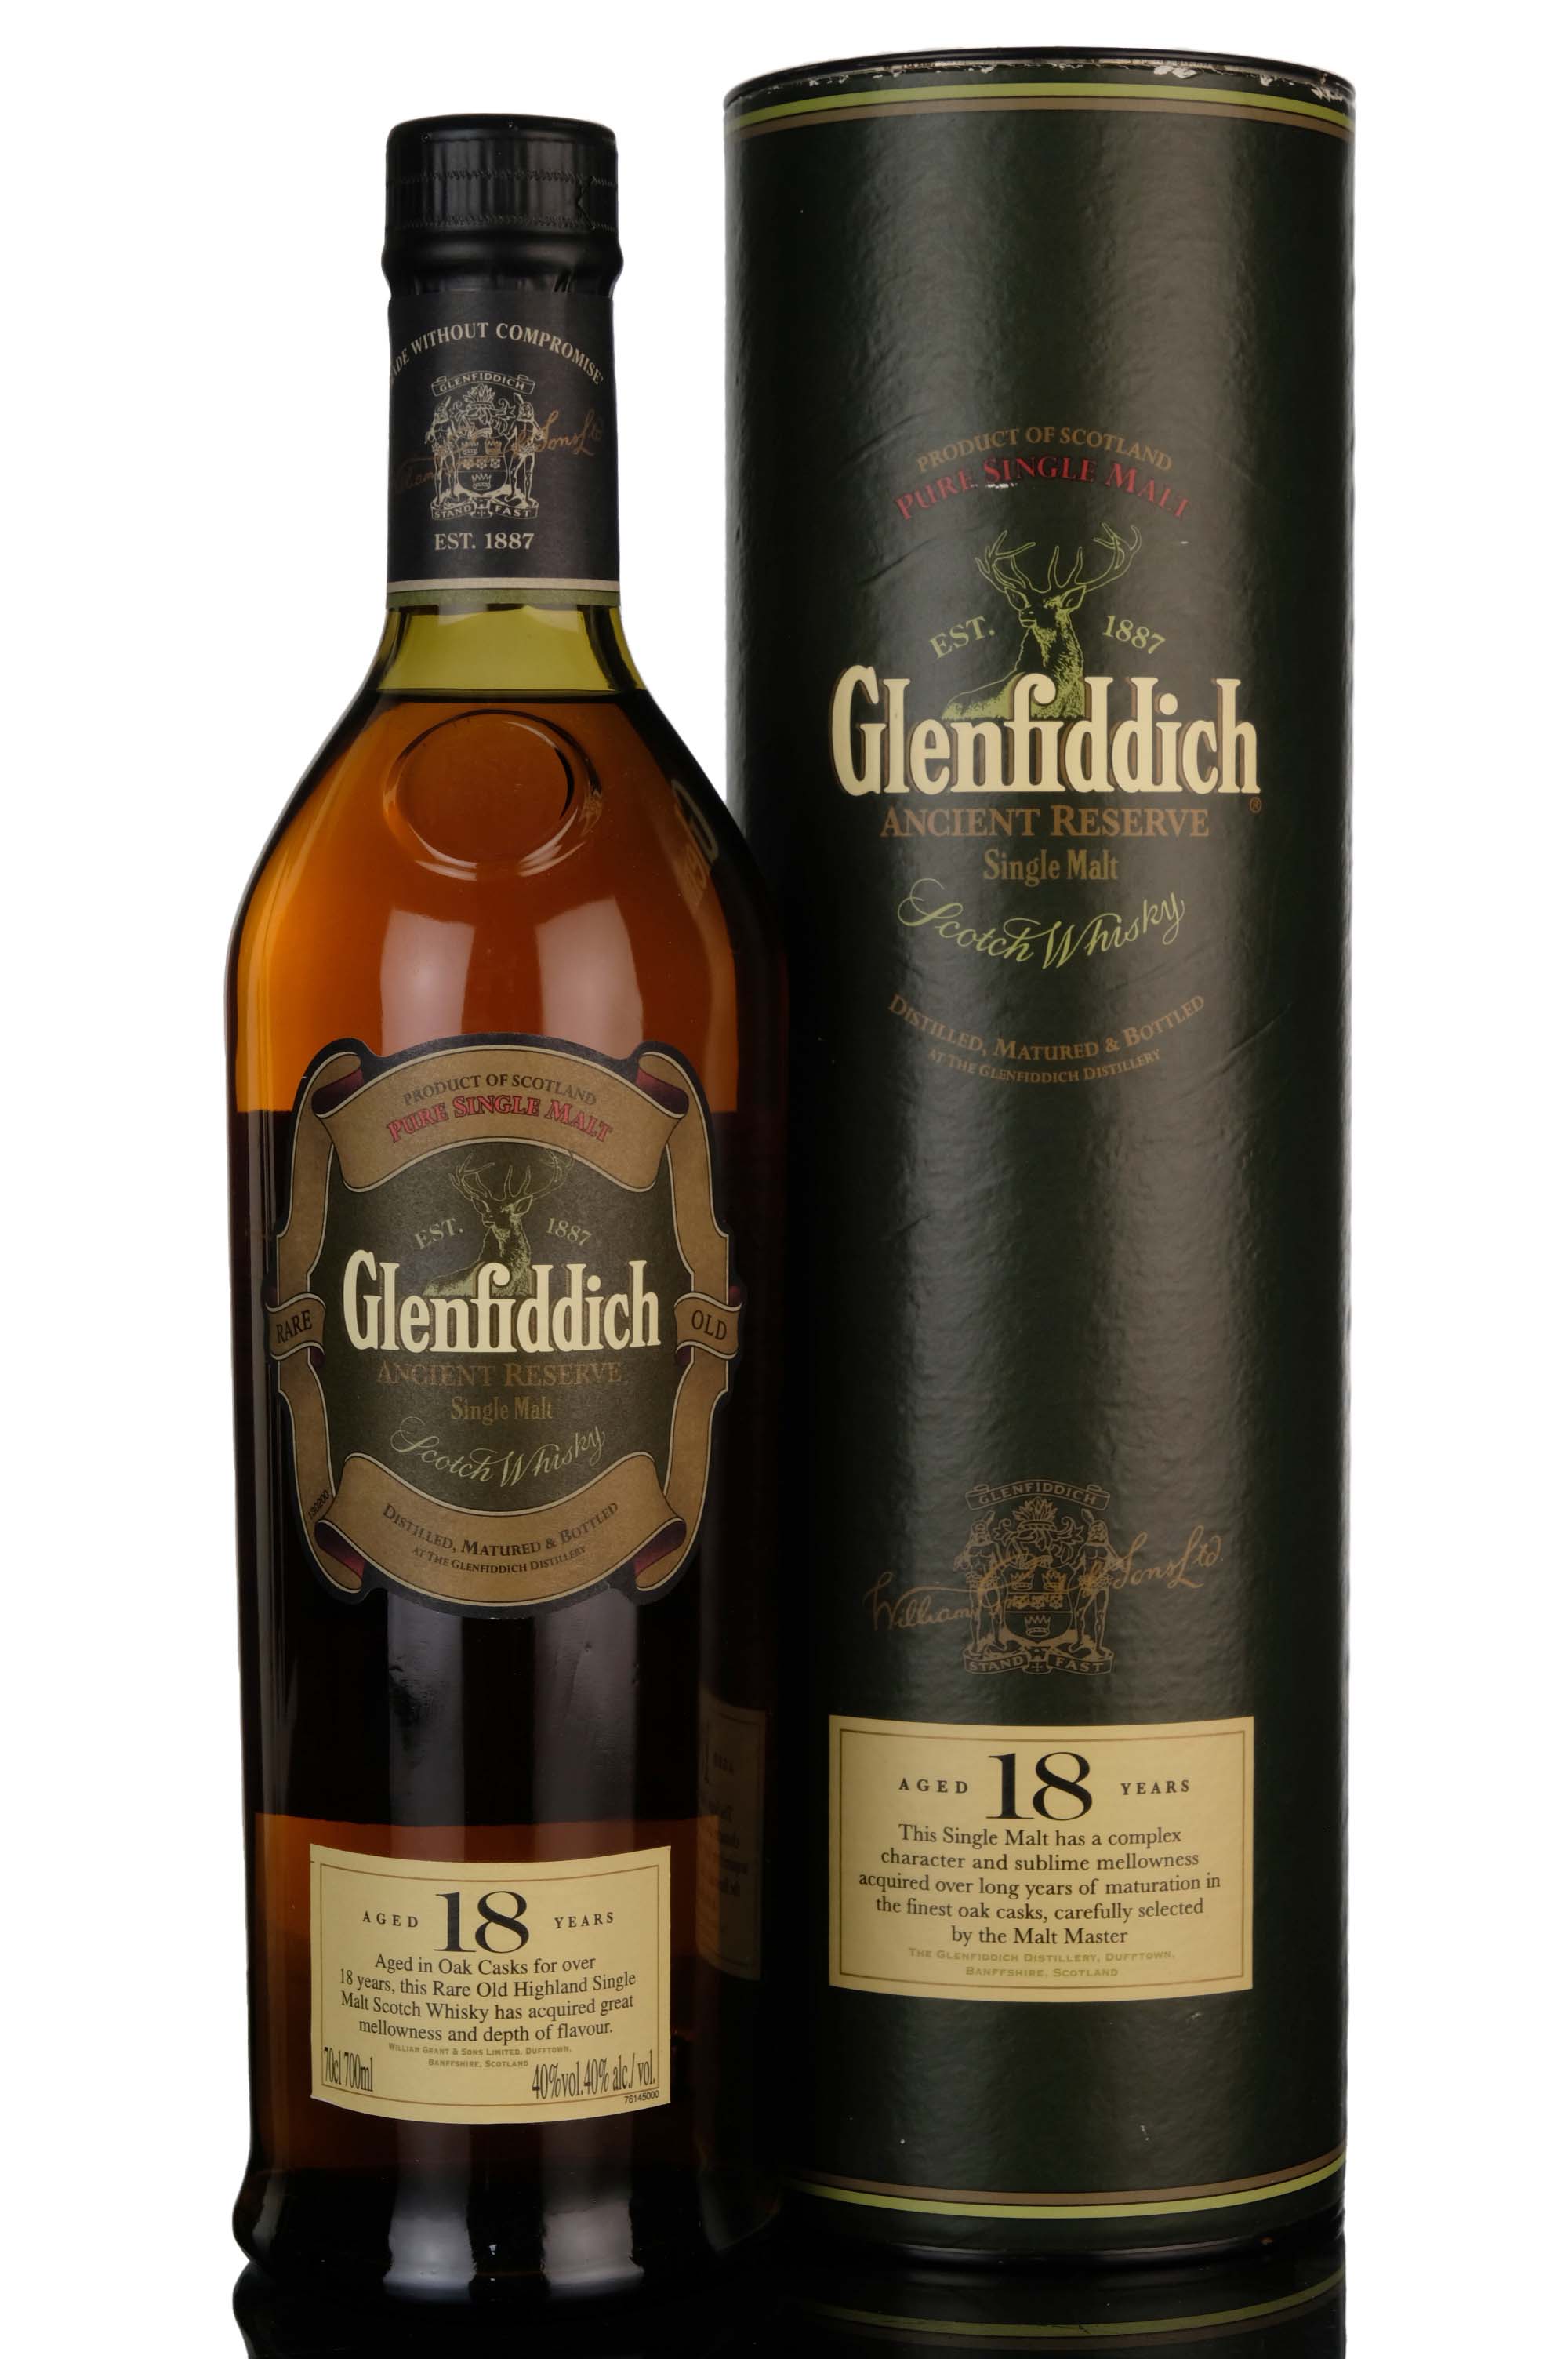 Glenfiddich 18 Year Old - Ancient Reserve - 2000s